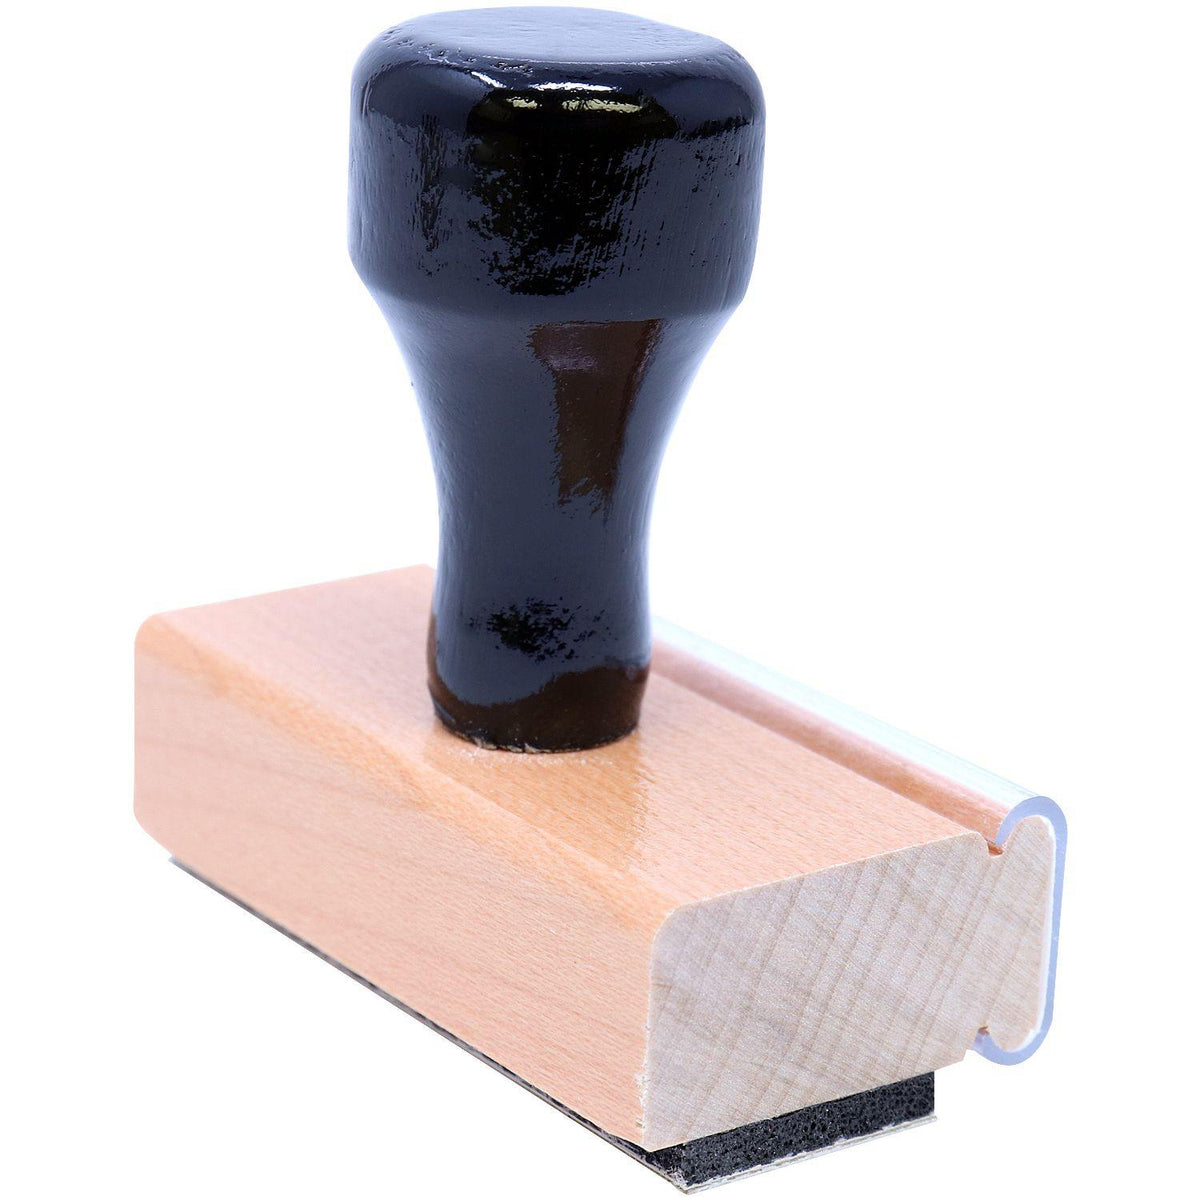 Large Special Standard Mail Rubber Stamp - Engineer Seal Stamps - Brand_Acorn, Impression Size_Large, Stamp Type_Regular Stamp, Type of Use_Postal &amp; Mailing, Type of Use_Shipping &amp; Receiving